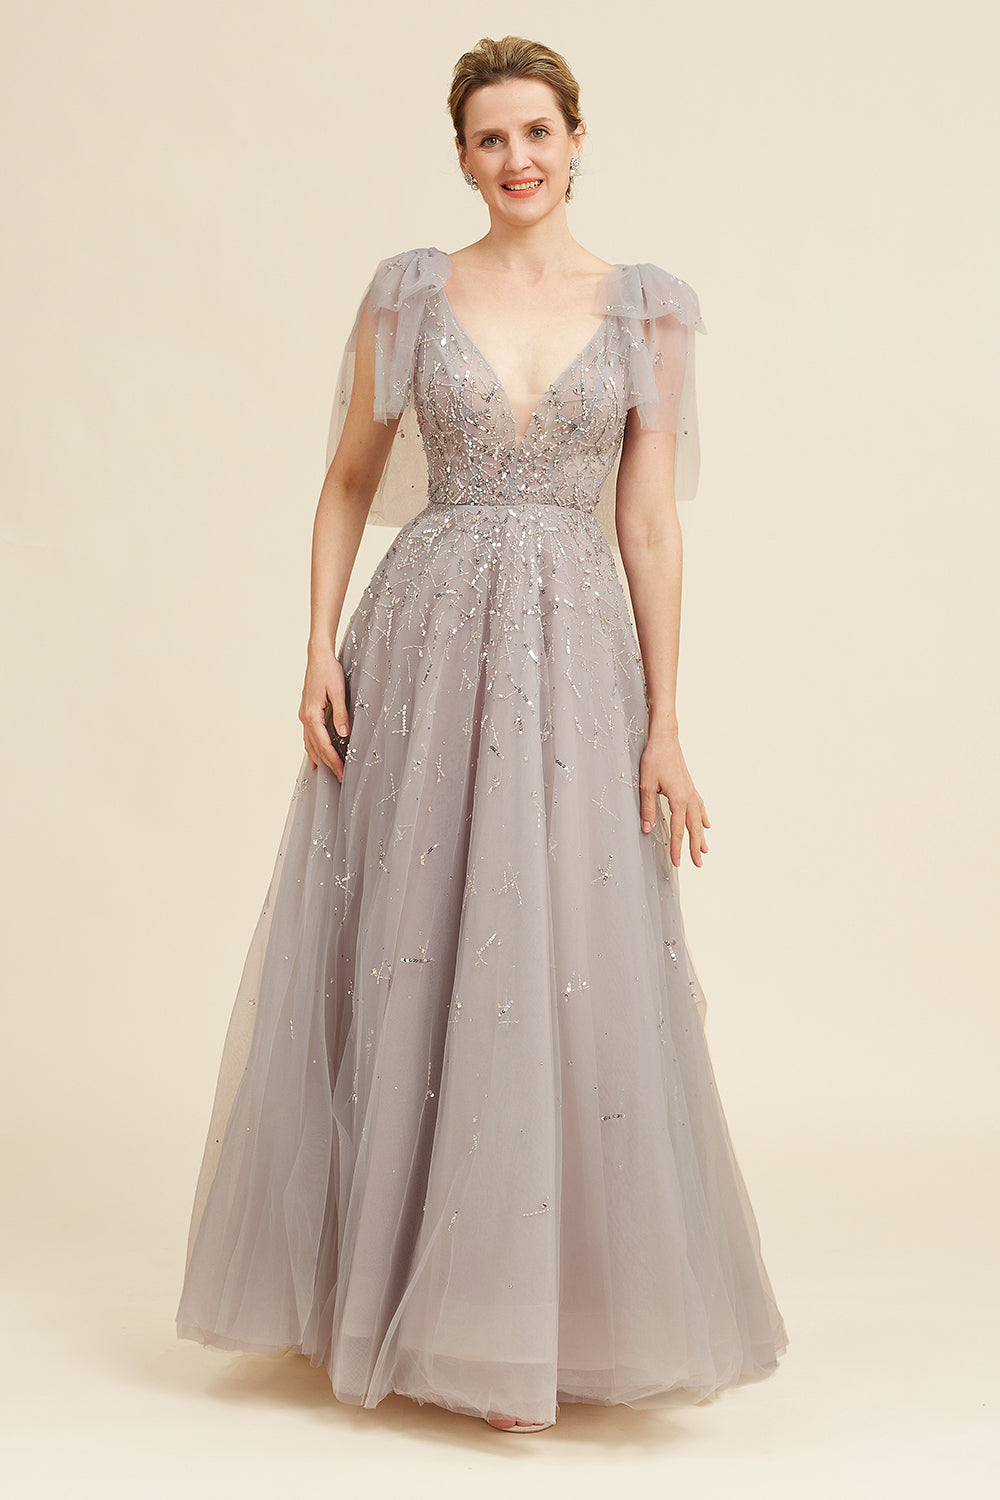 Grey A Line Beading Glitter Mother of Bride Dress